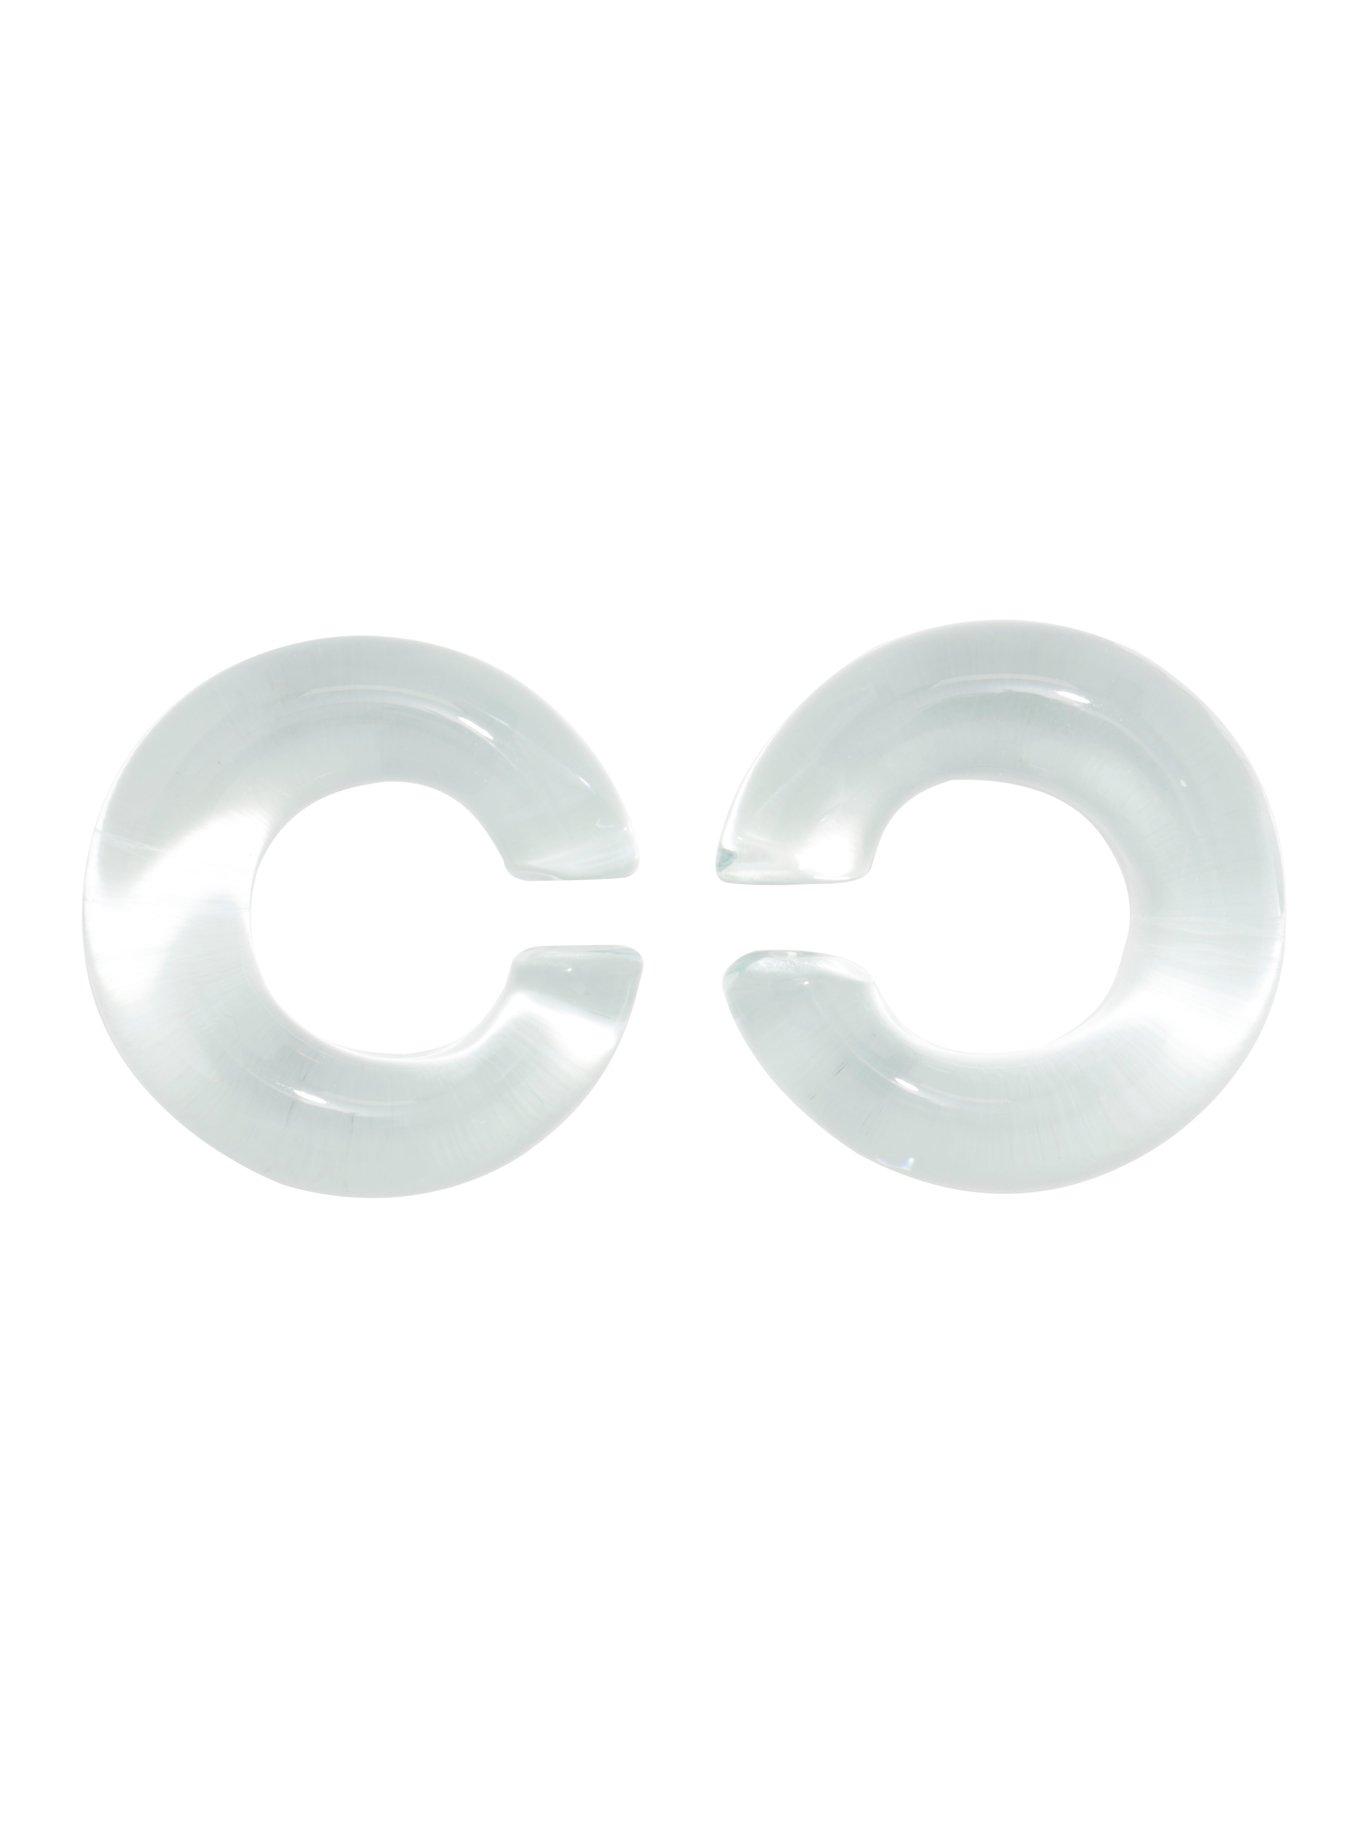 Sea Glass Circle Weights 2 Pack, MULTI, hi-res